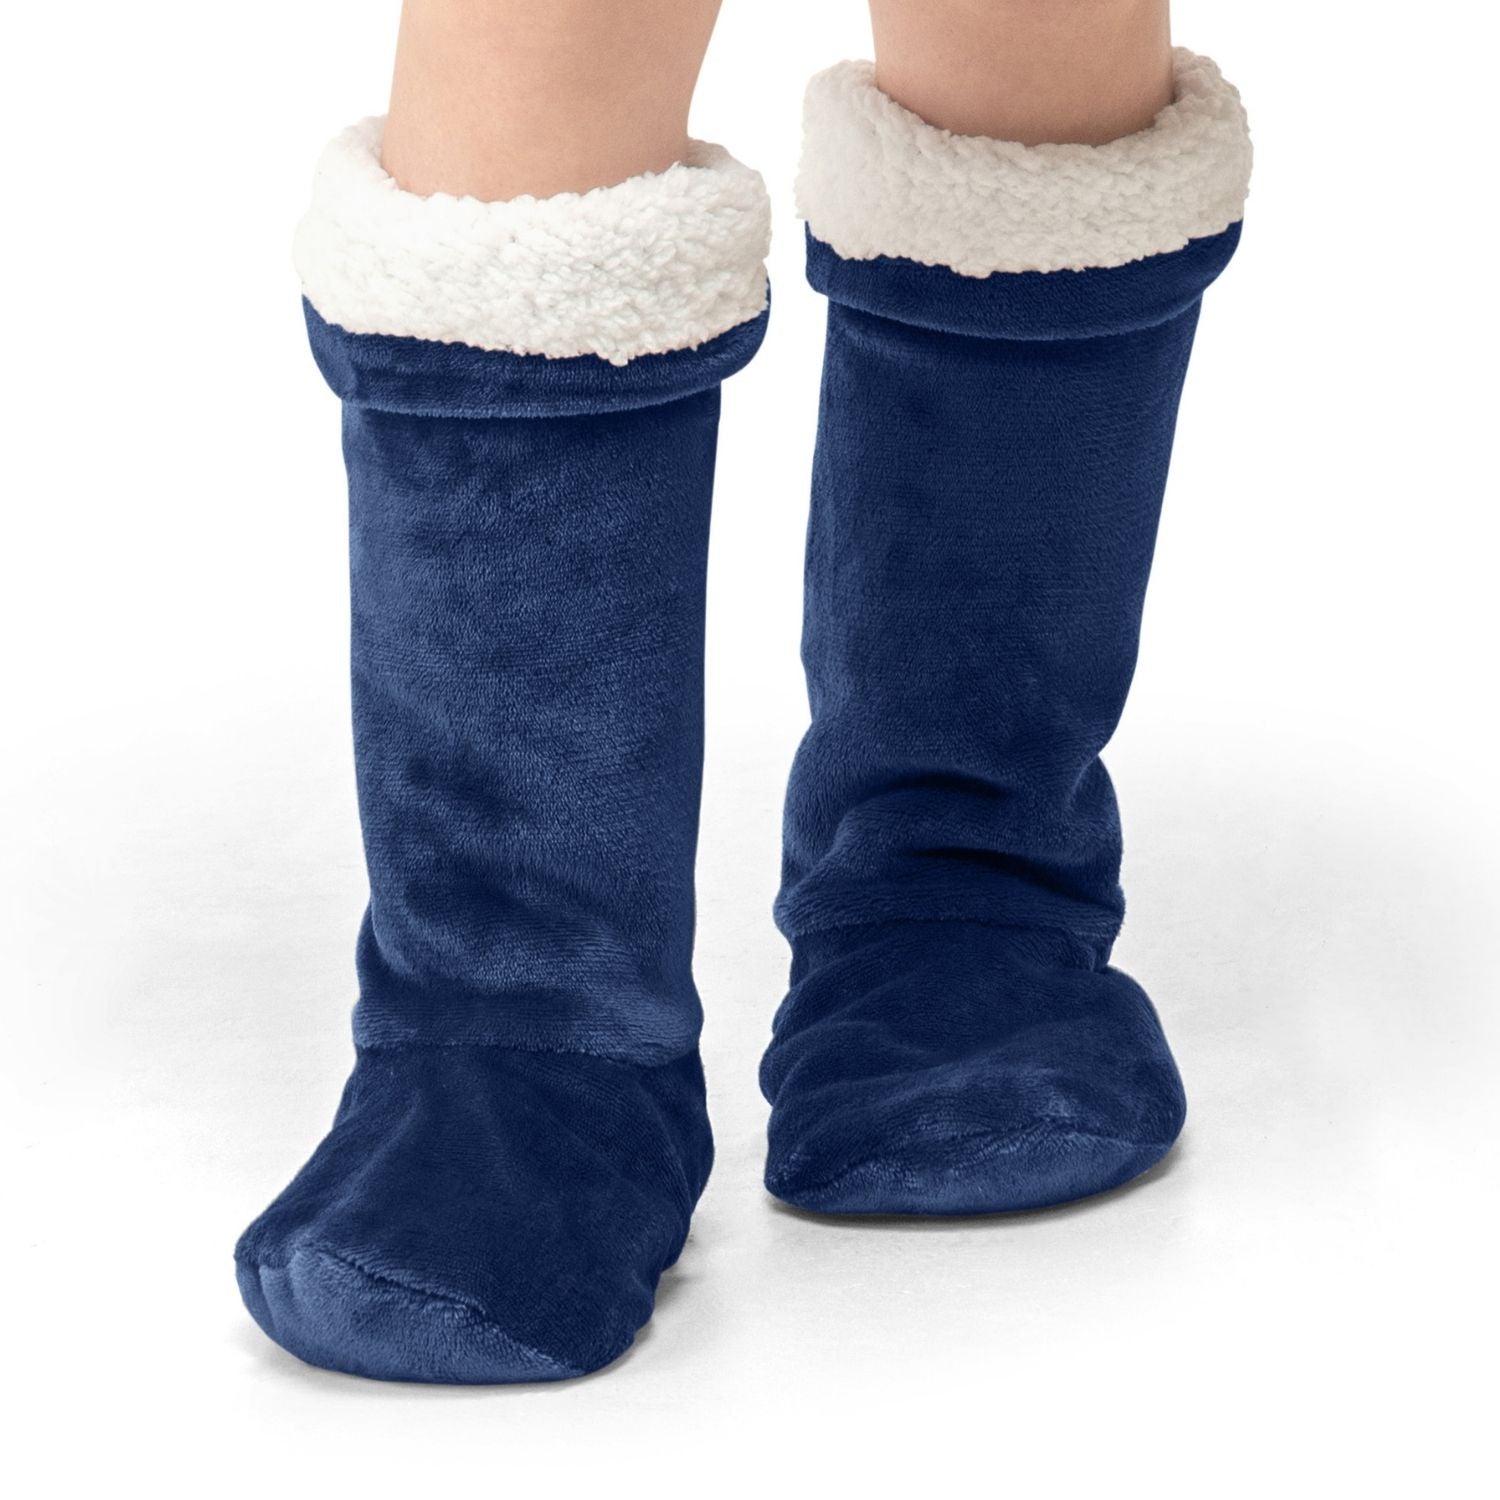 The Home Bedroom Cosy Socks - Navy 1 Shaws Department Stores